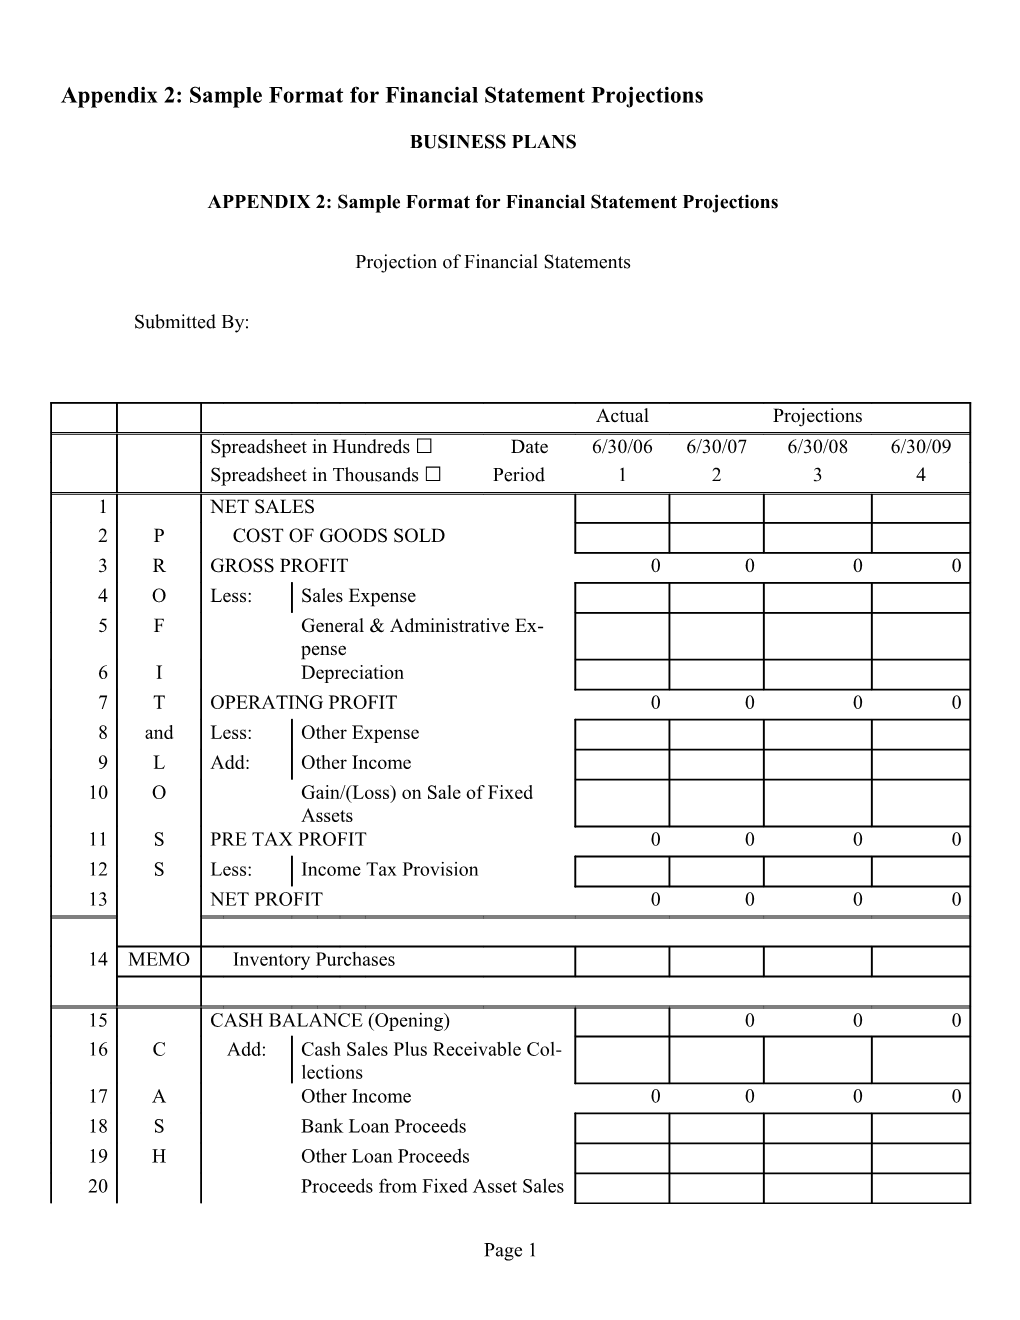 Appendix 2: Sample Format for Financial Statement Projections